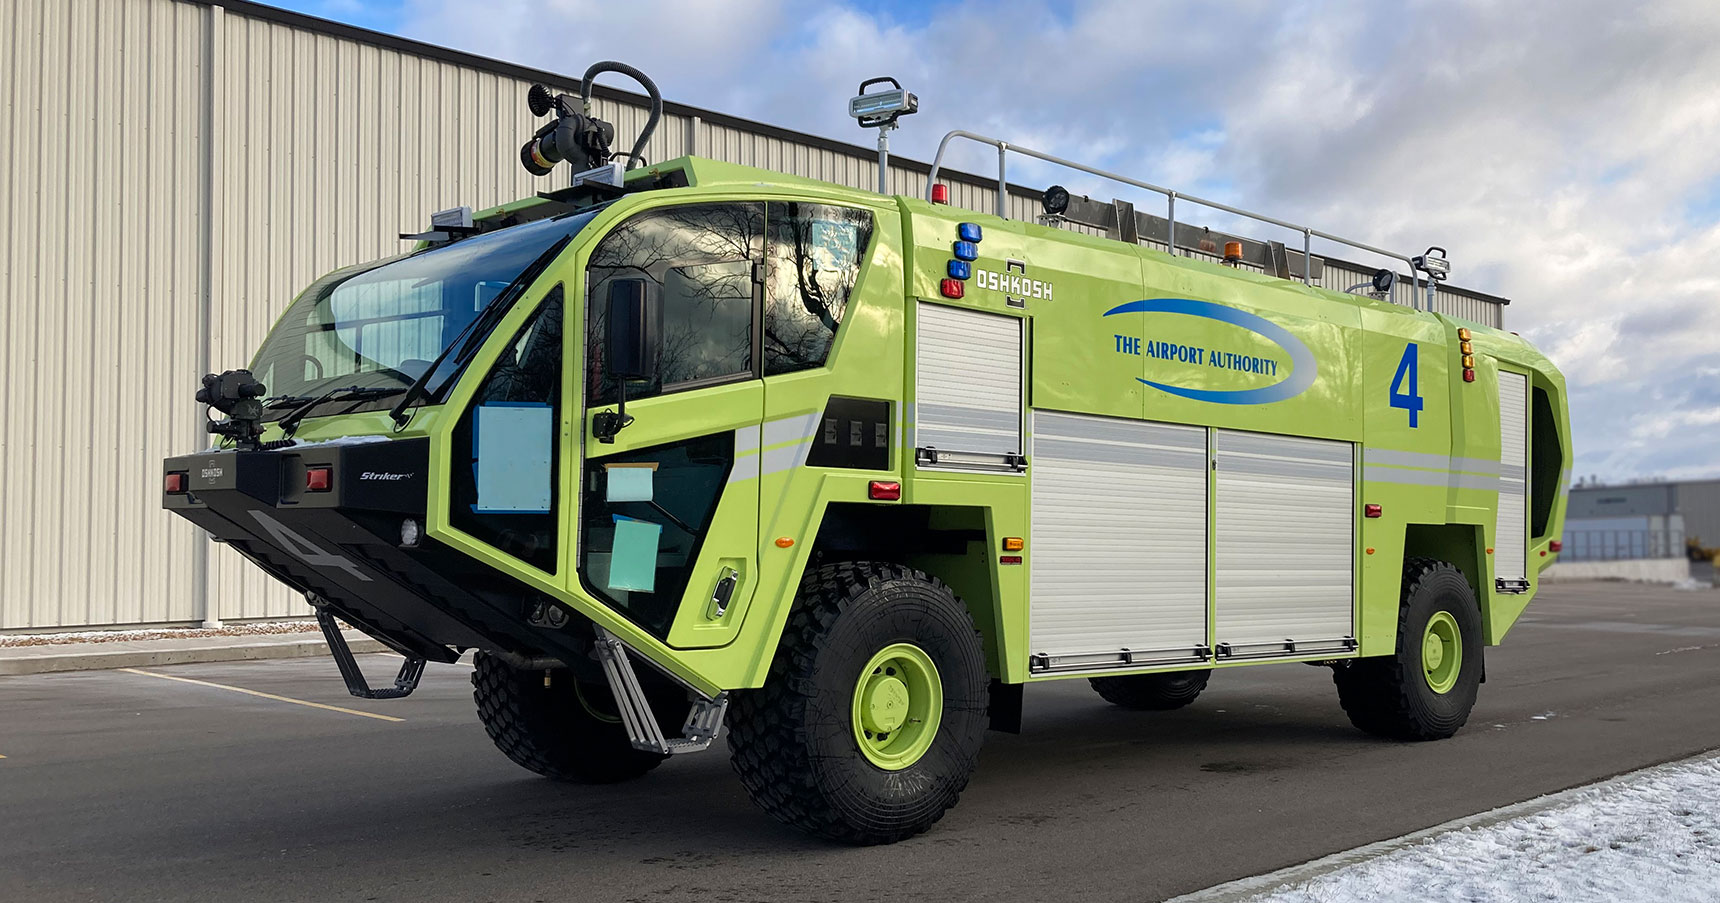 Four airports in the Bahamas confirm delivery of Oshkosh ARFF vehicles